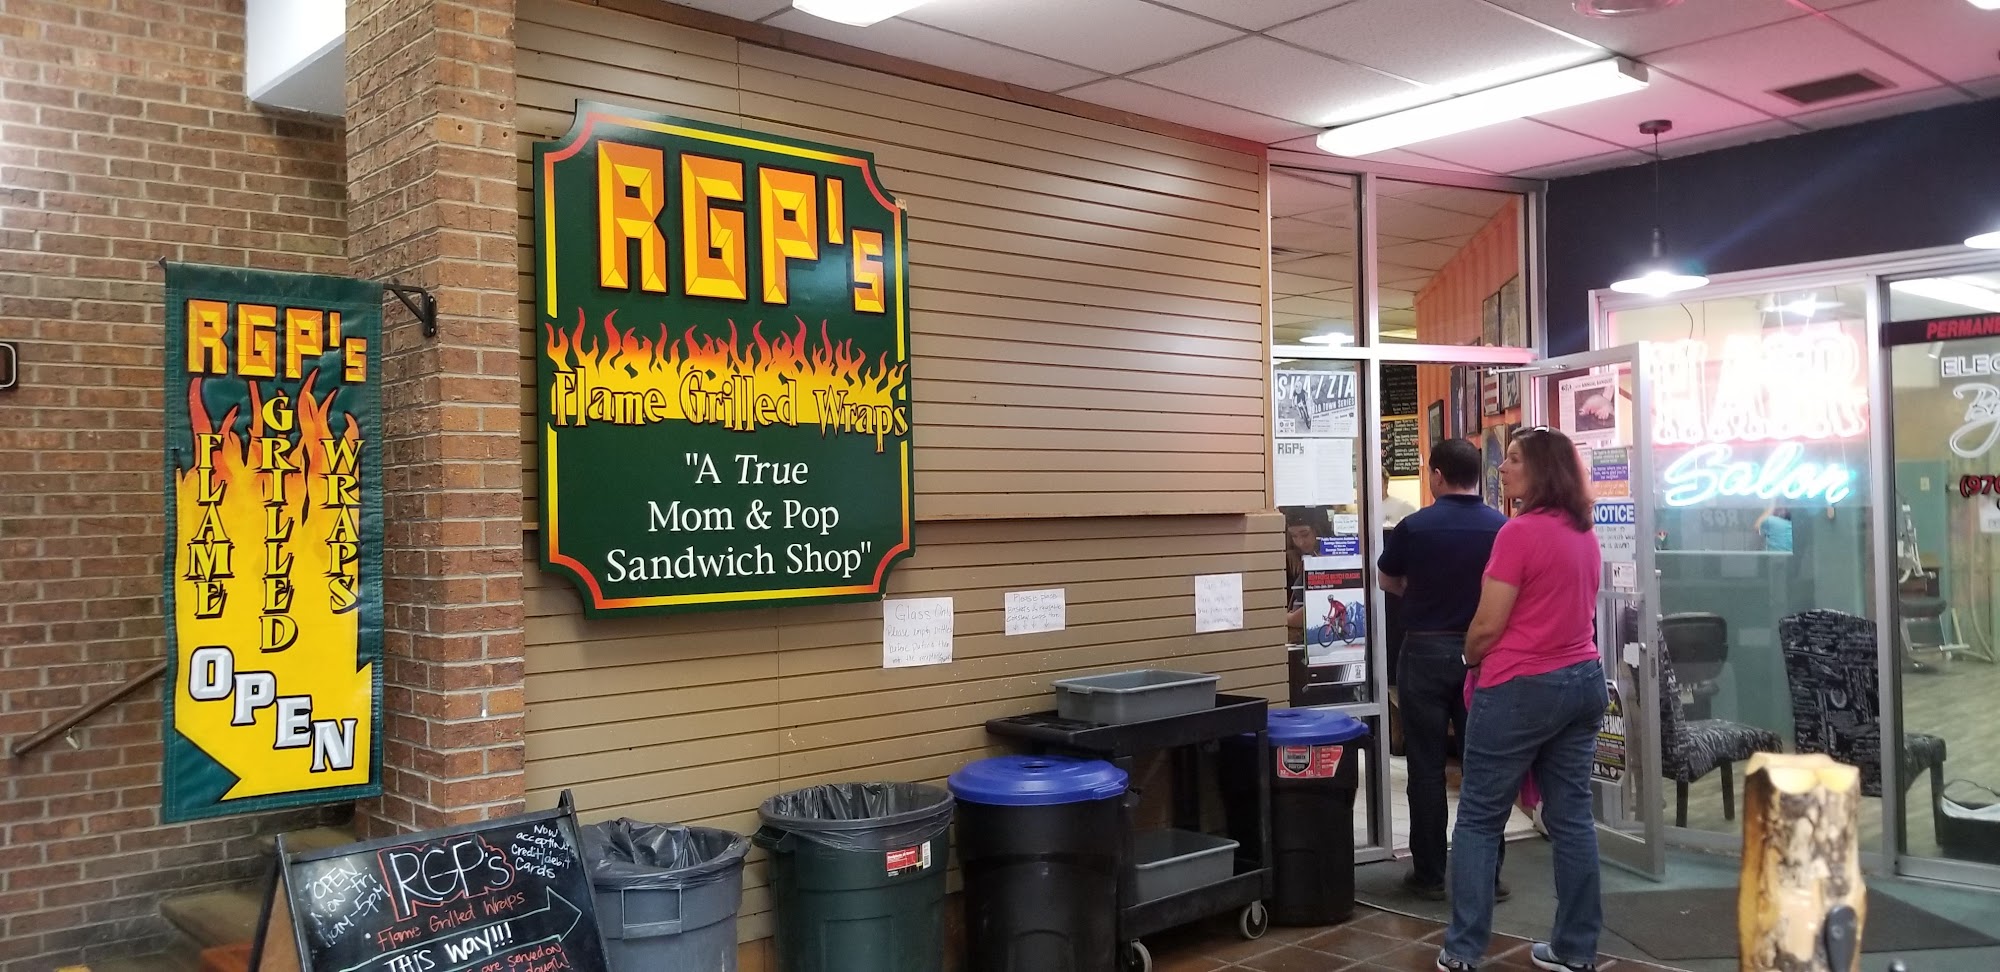 R G P's Flame Grilled Wraps